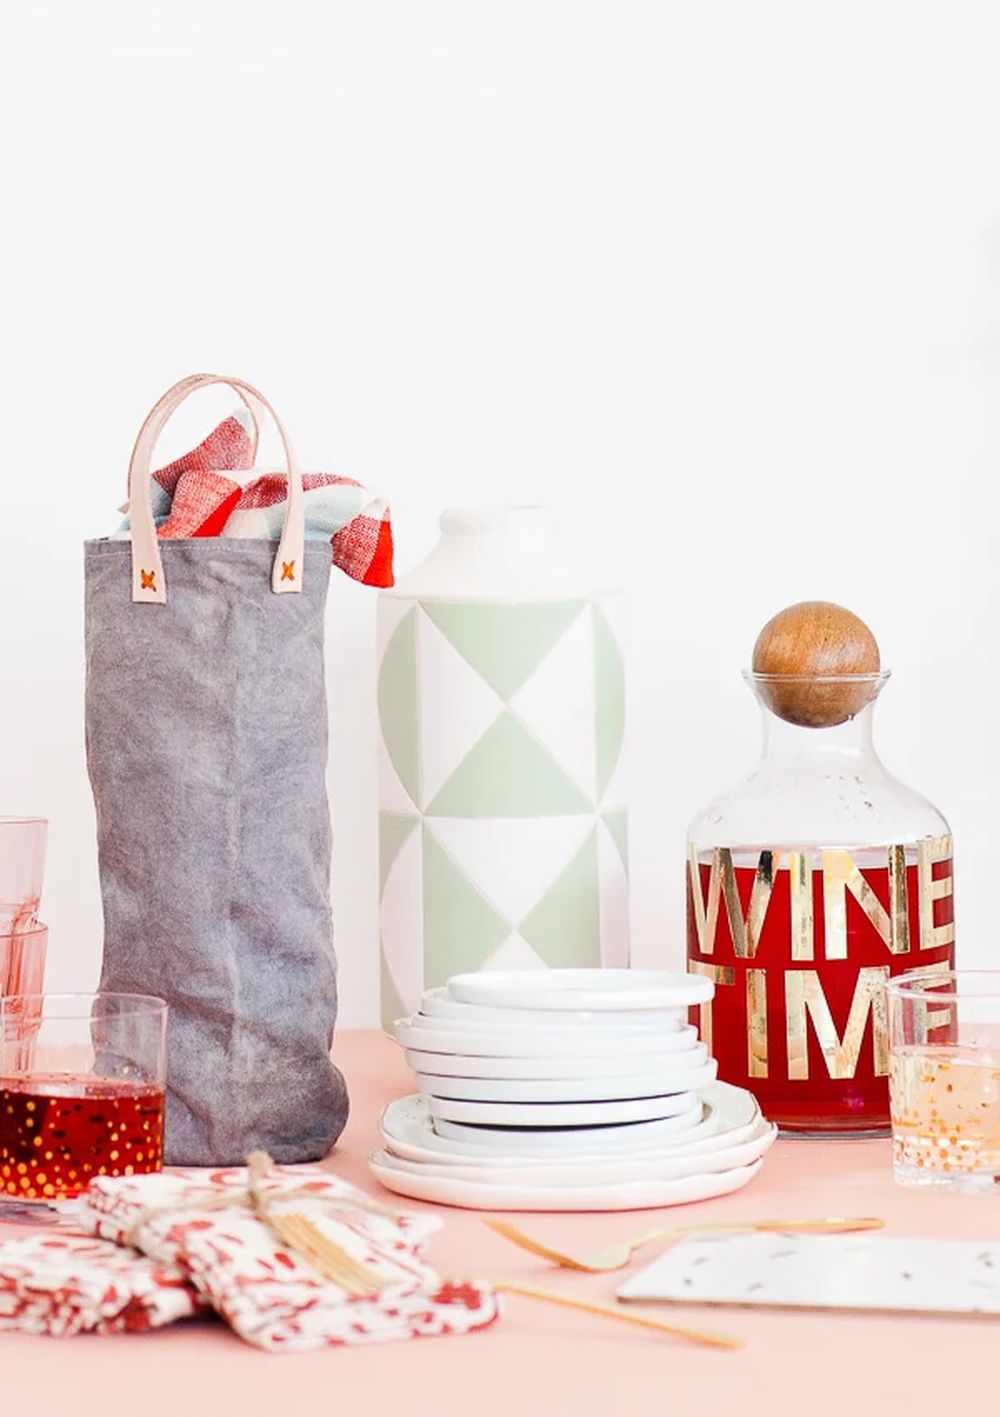 Diy canvas wine bag things you can get your dad for christmas